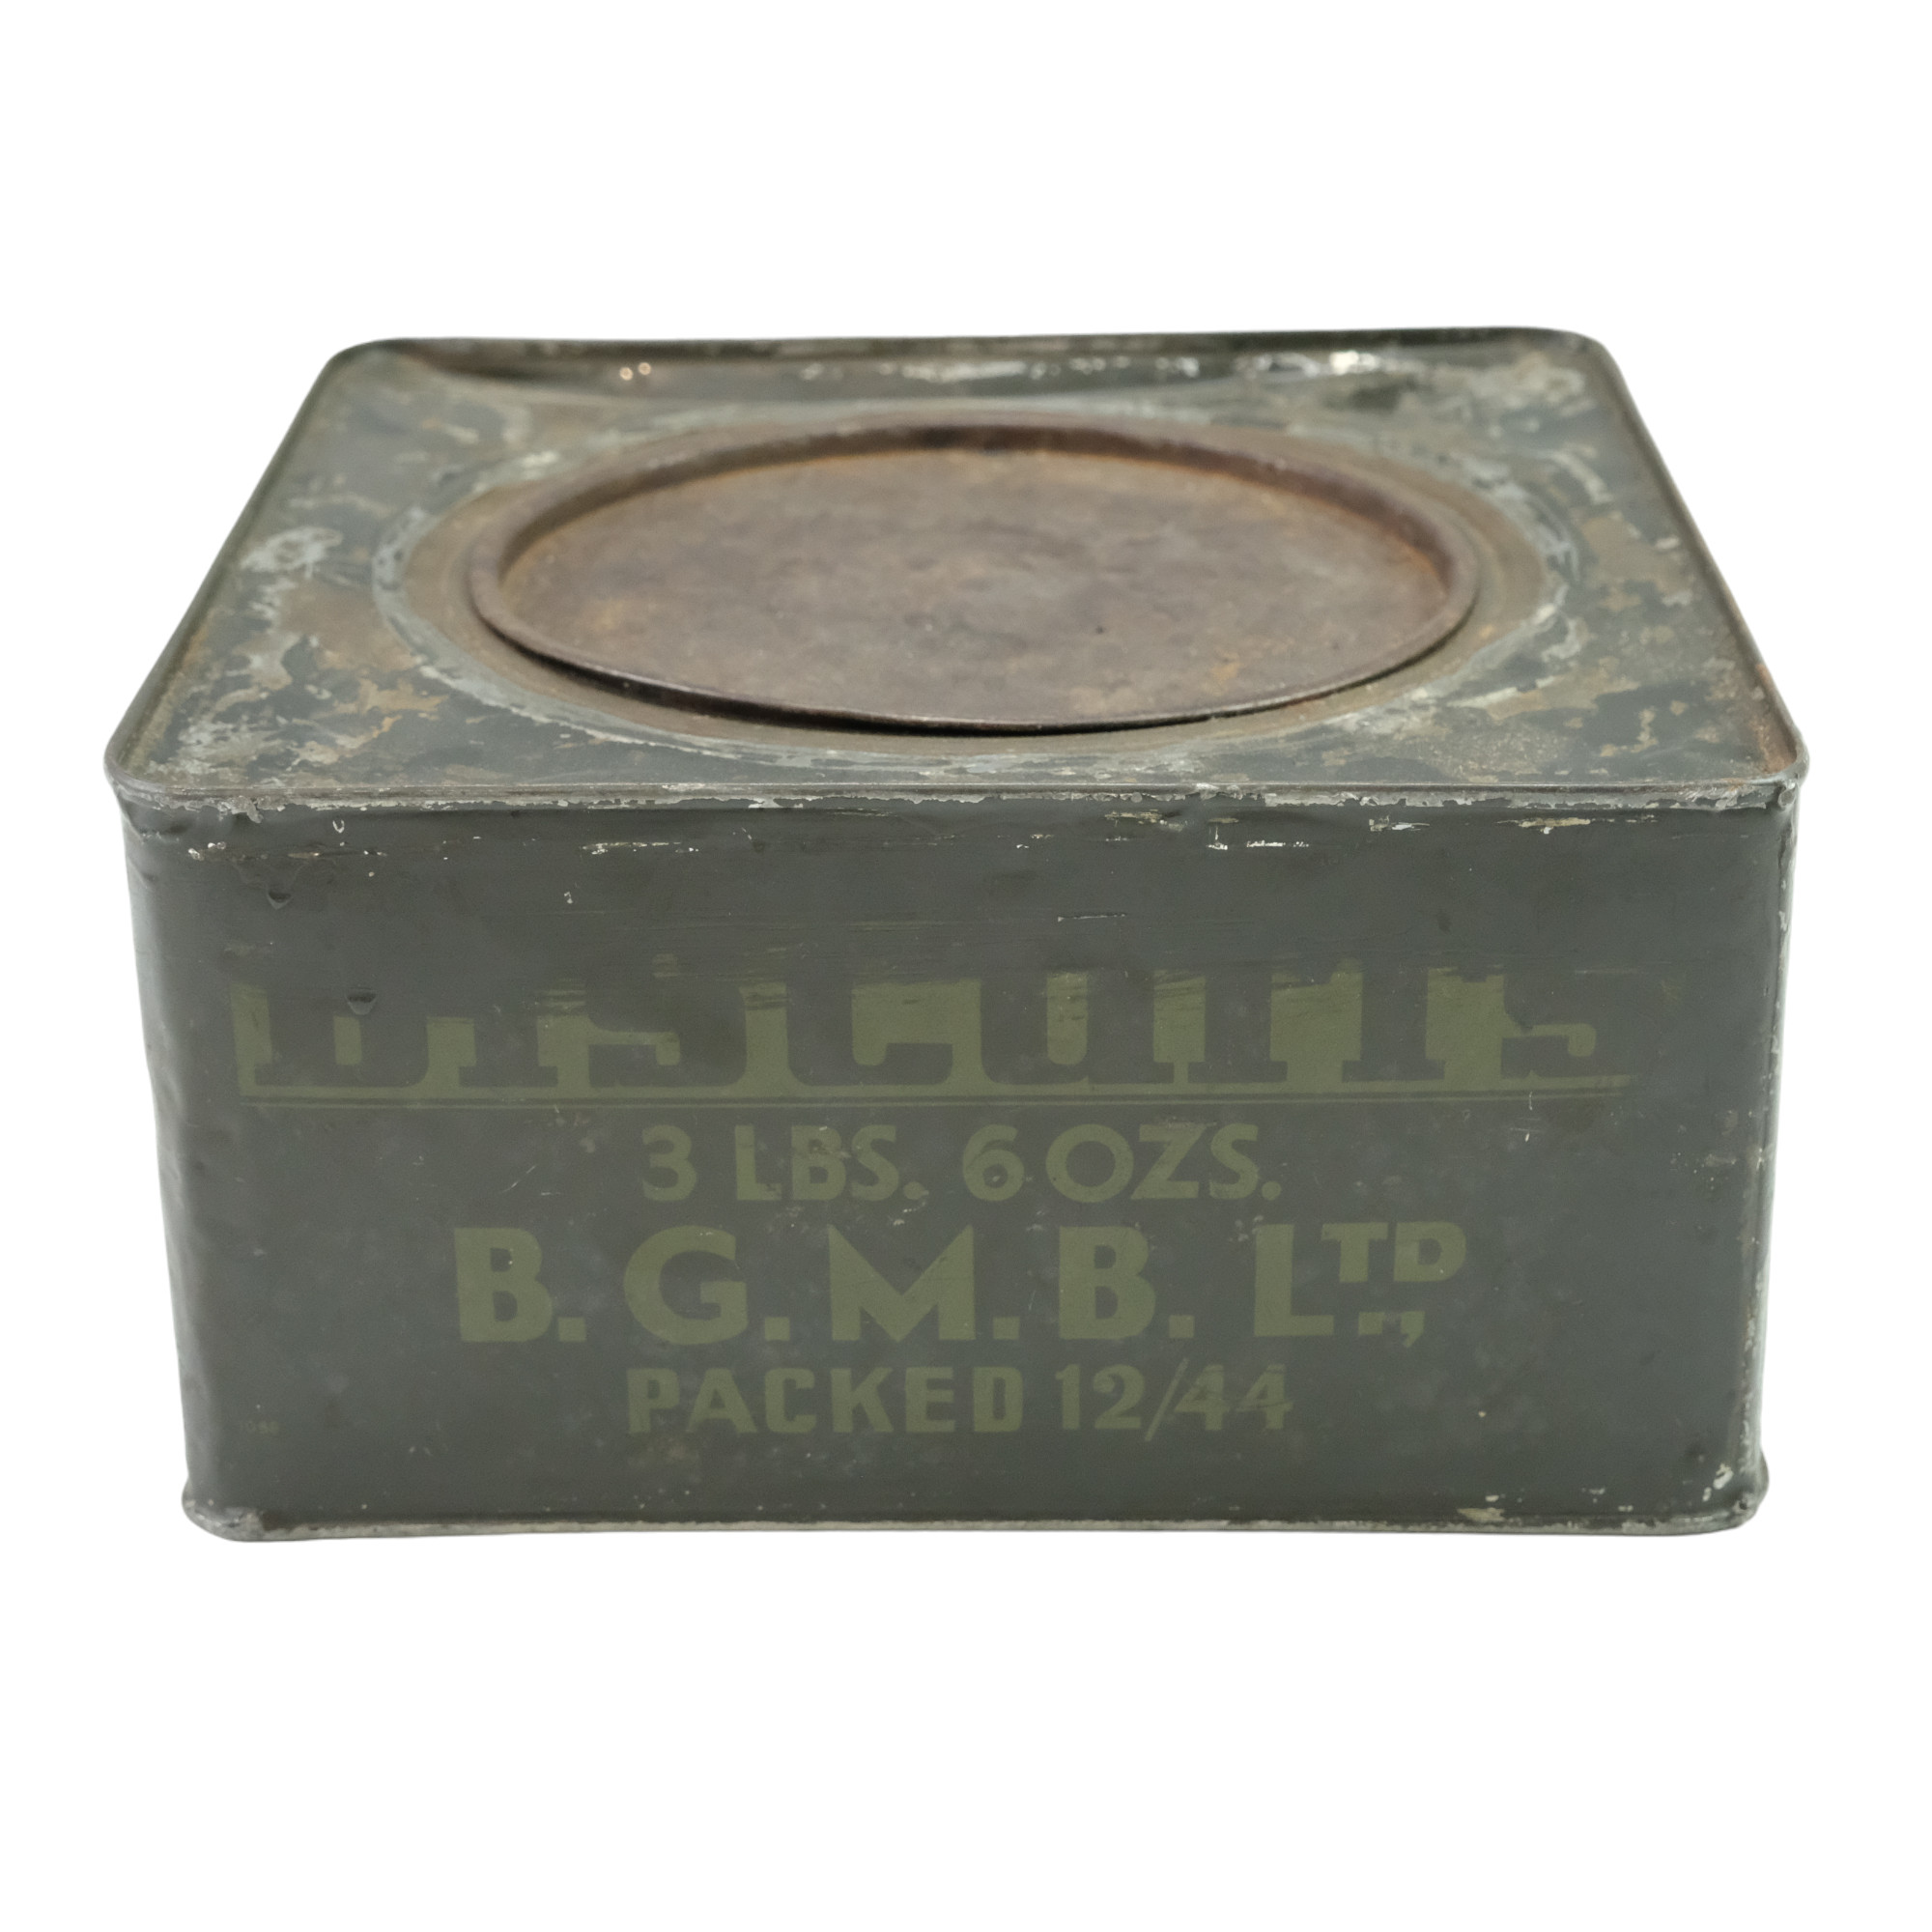 A 1944 British Army 3lb 6oz Biscuits ration tin